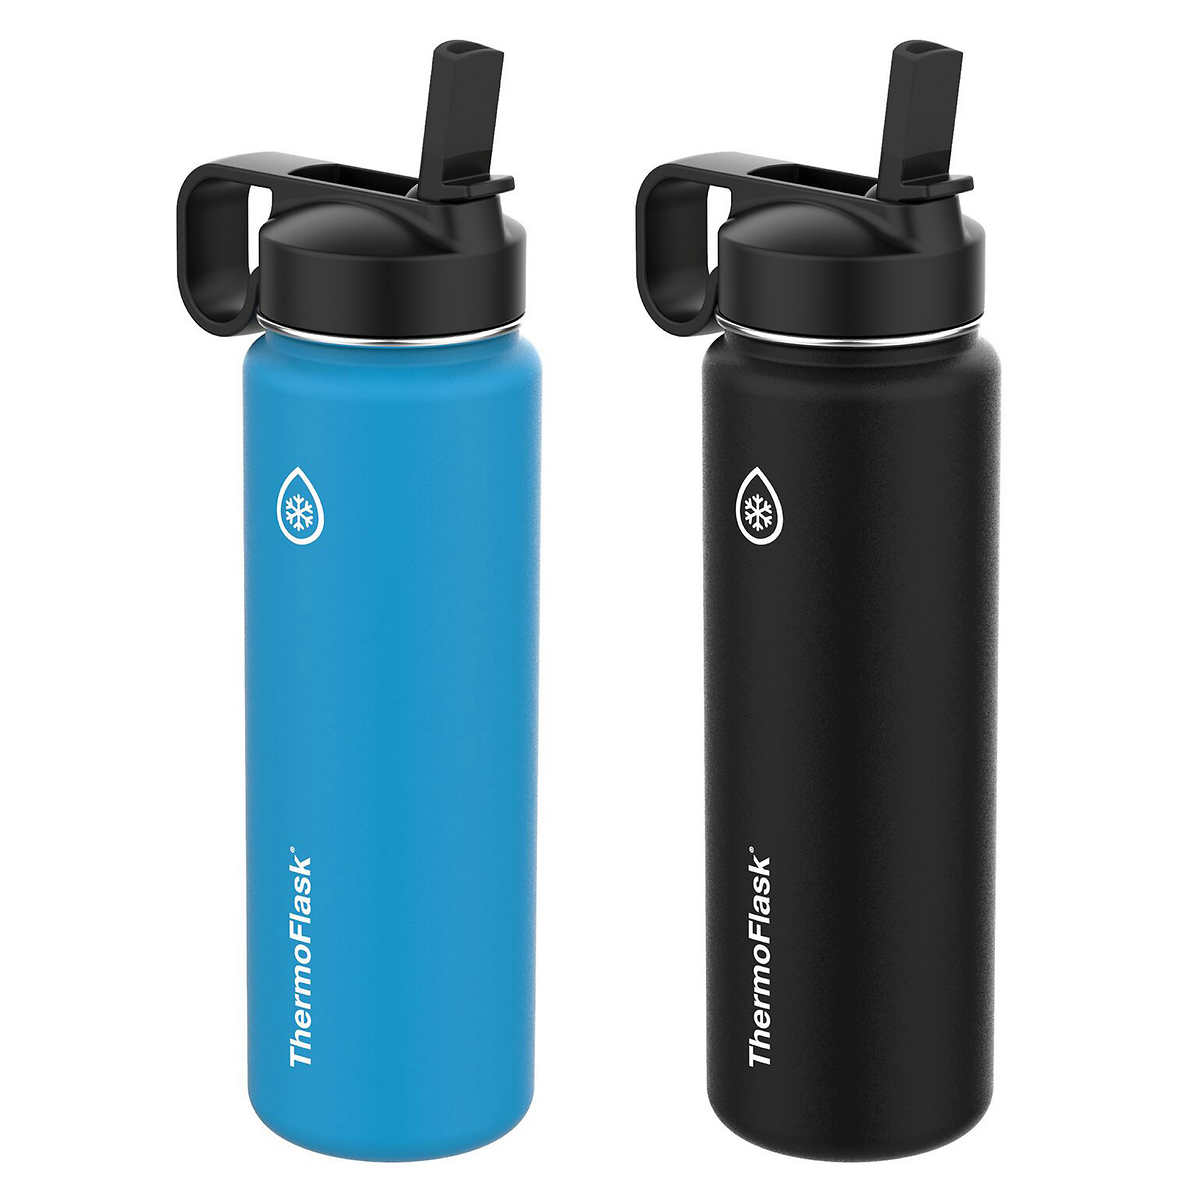 FOUR (4) BOTTLES ThermoFlask 24 oz Stainless Steel Insulated Water